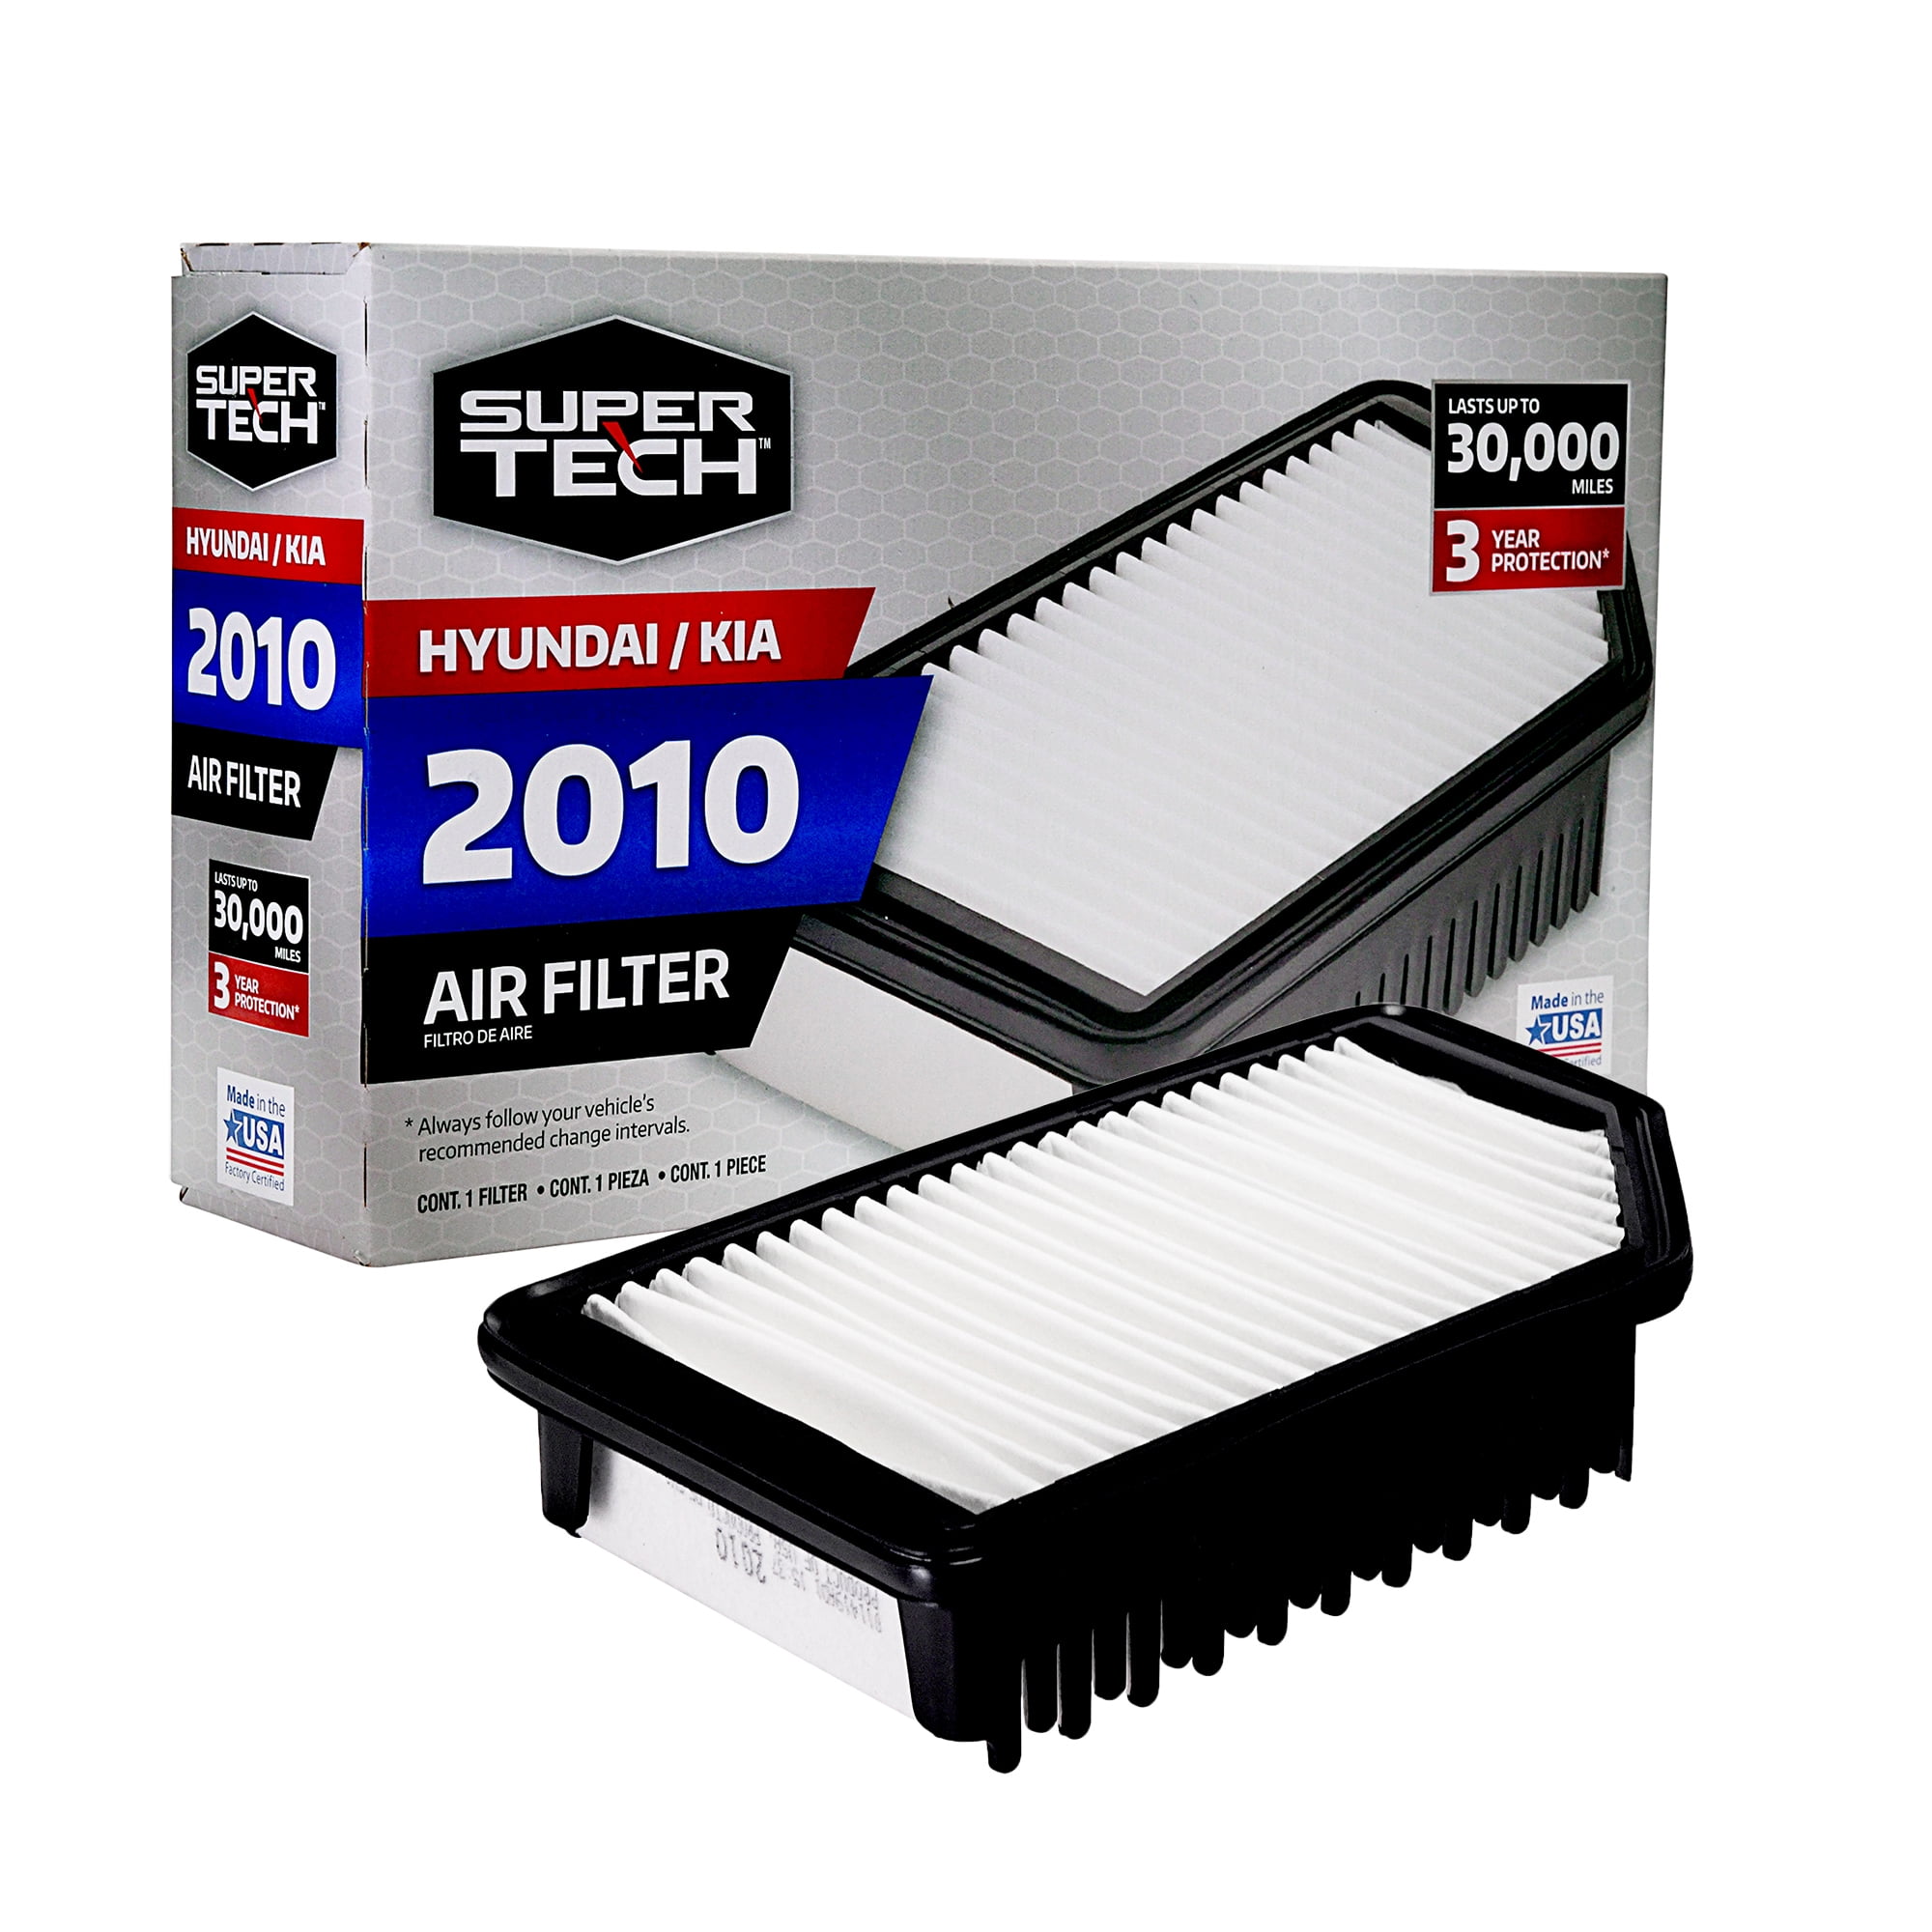 SuperTech 2010 Engine Air Filter, Replacement Filter for Hyundai and Kia